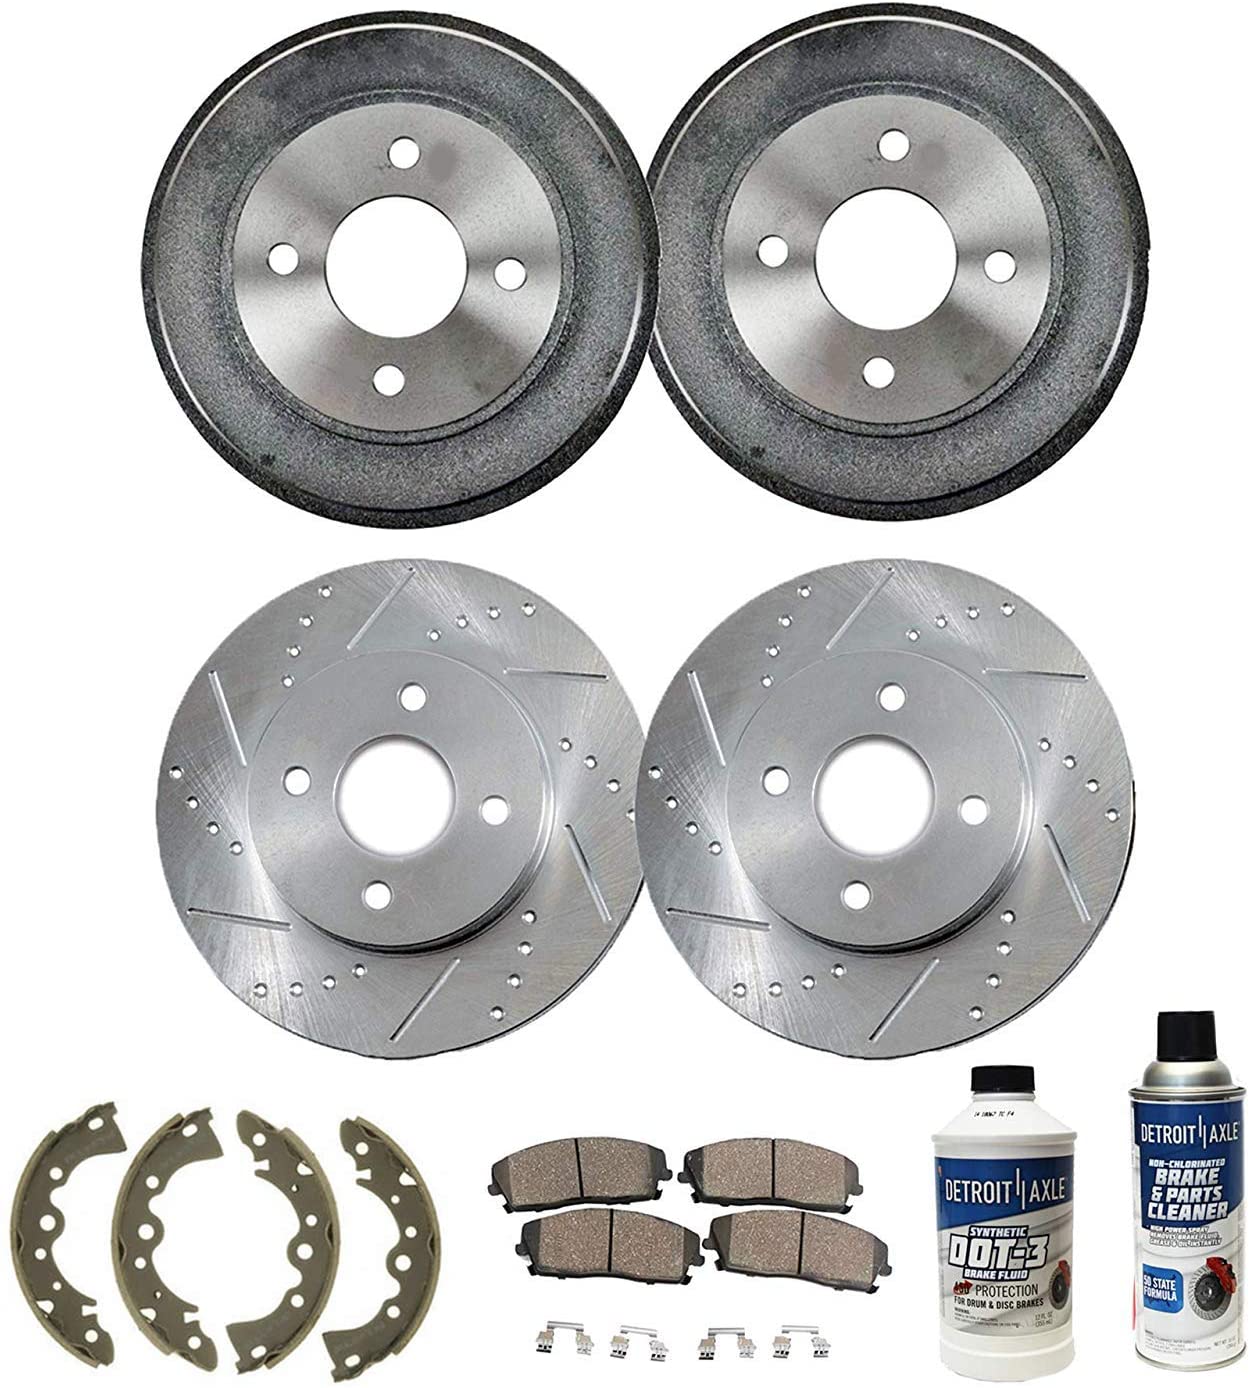 Detroit Axle - All (4) Front Drilled and Slotted Disc Brake Kit Rotors and Rear Brake Kit Drums w/Ceramic Shoes and Pads for 2000 2001 2002 2003 2004 2005 2006 Nissan Sentra 1.8L